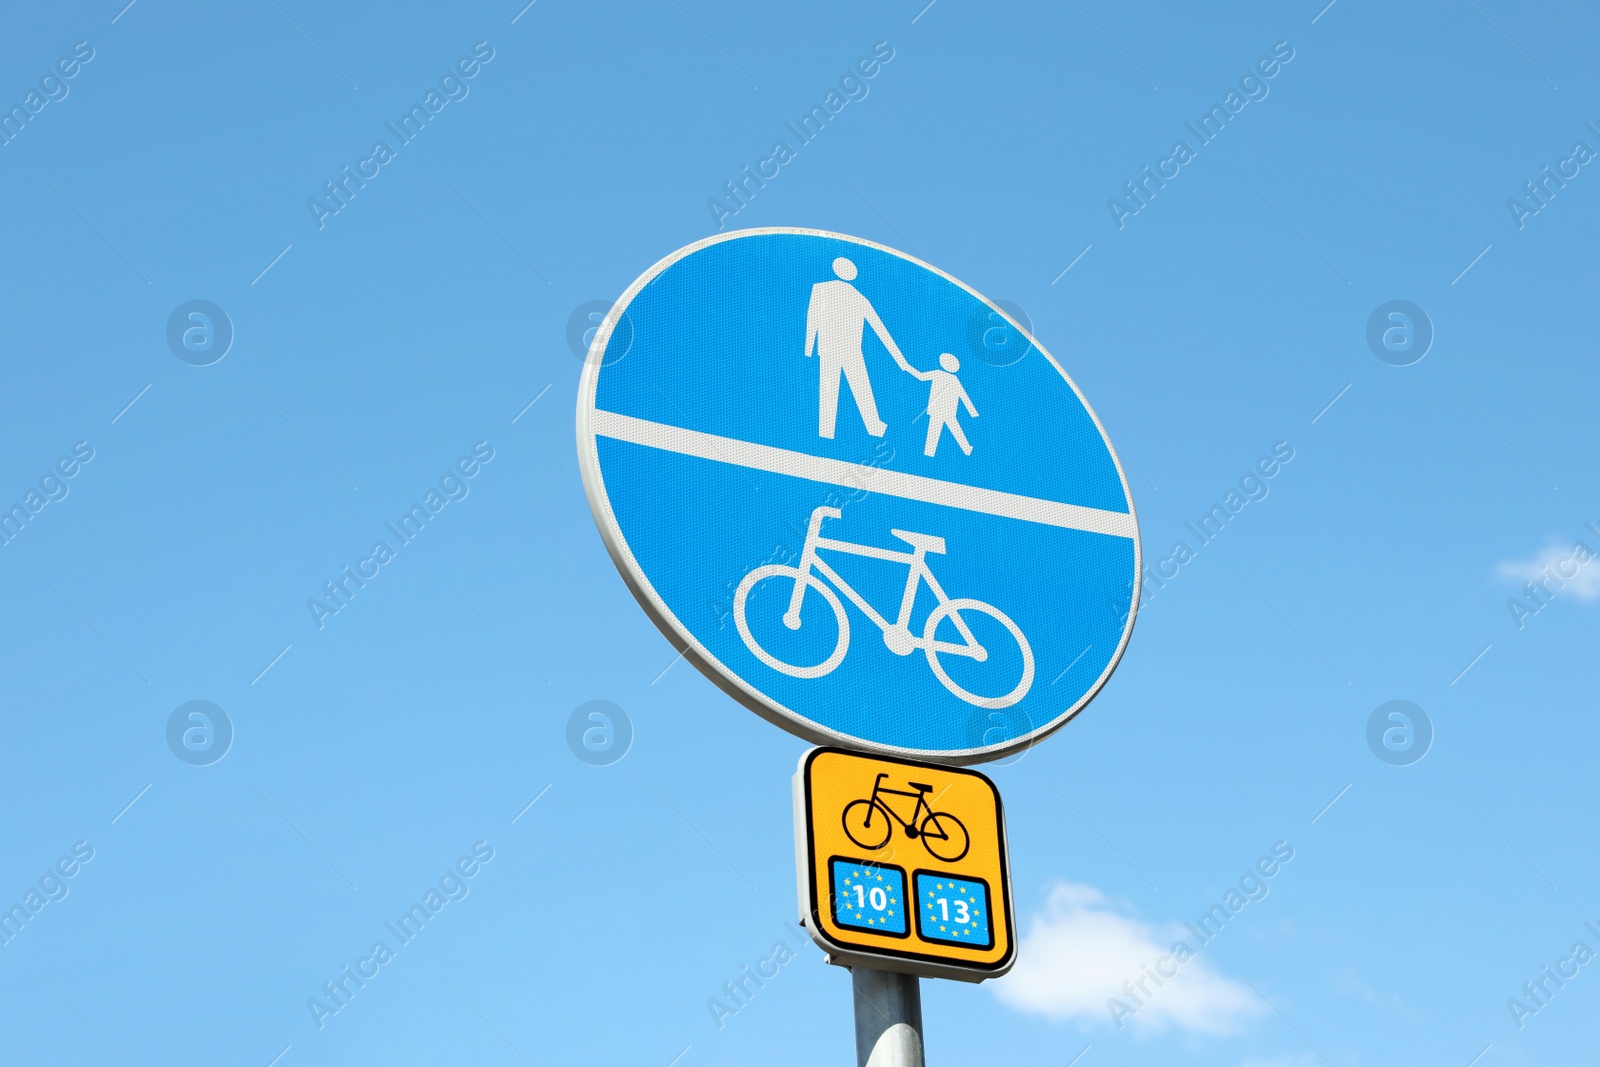 Photo of Different traffic signs against blue sky, low angle view